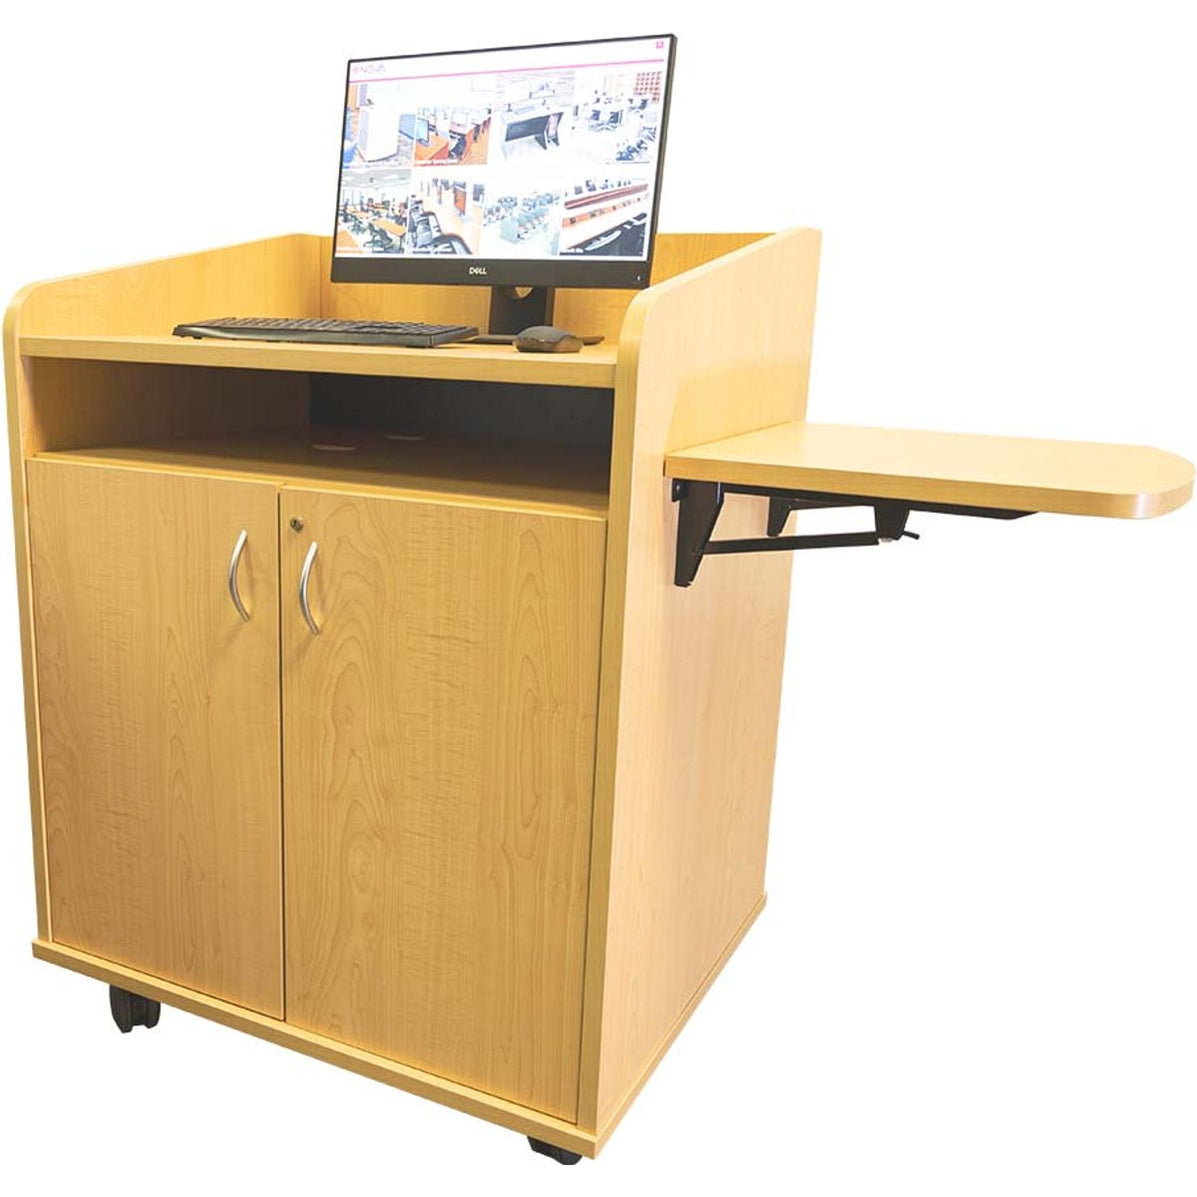 teacher podium with storage- door opens up and keyboard tray pulled out